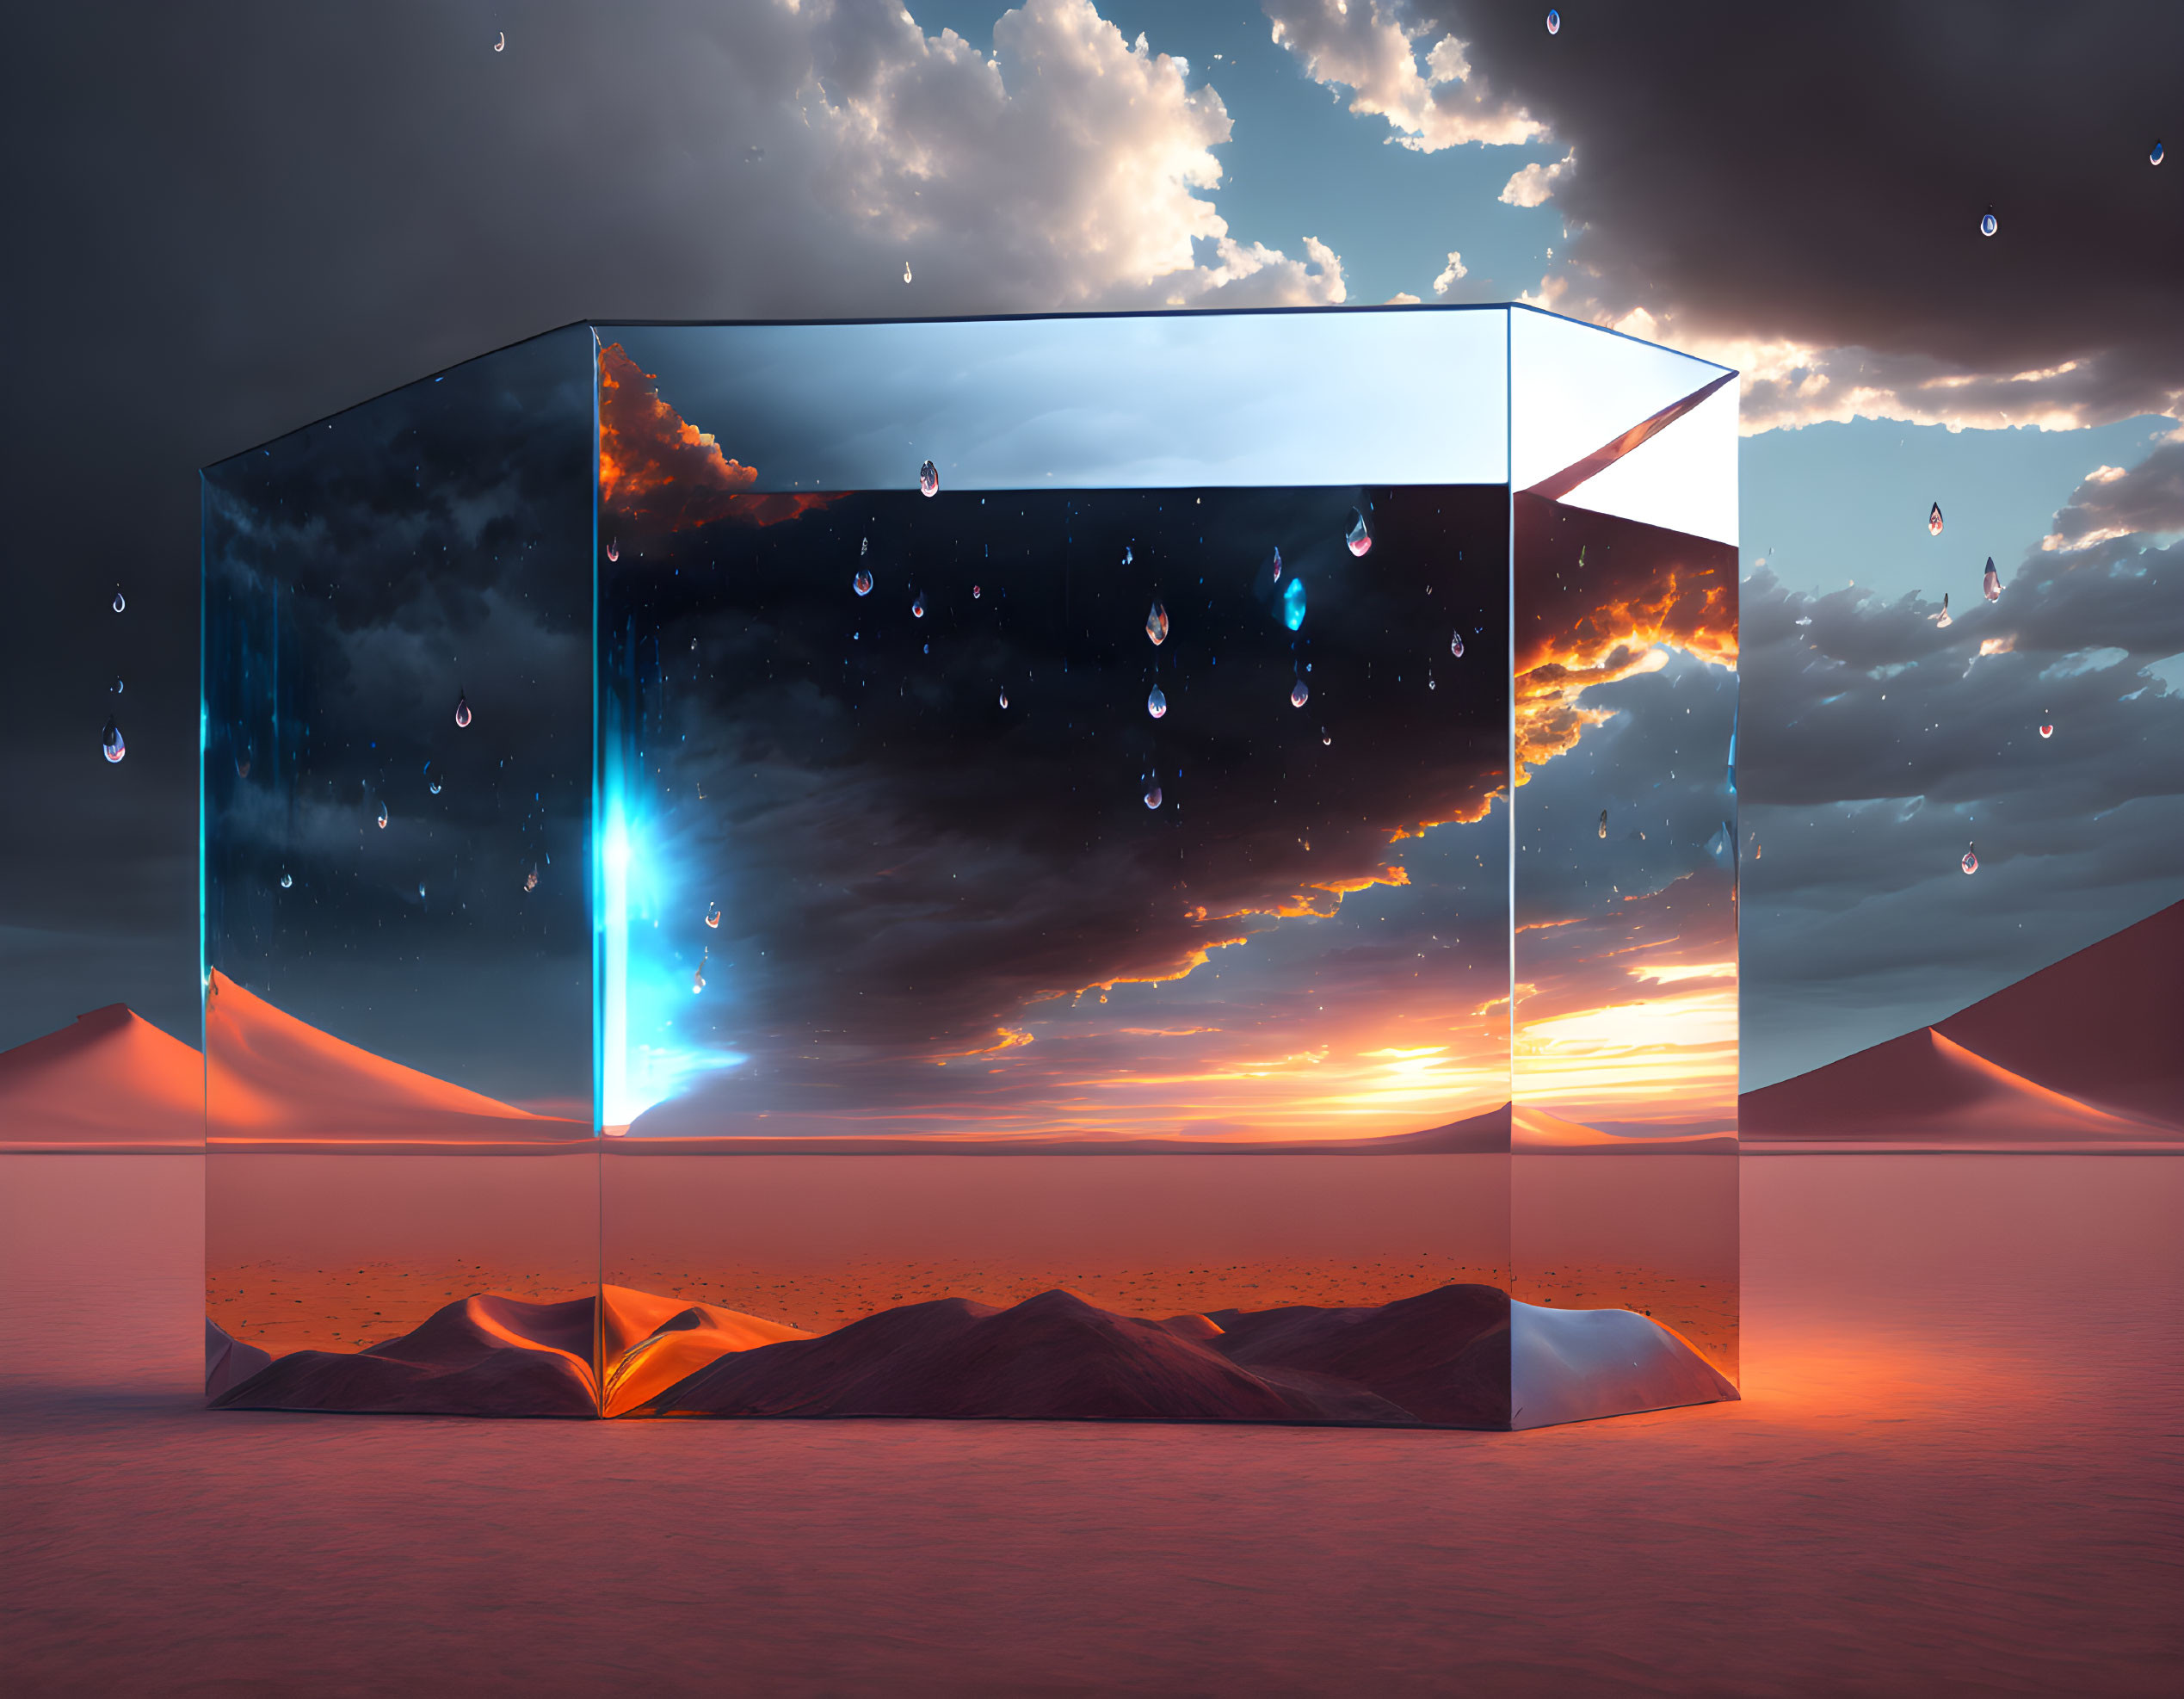 Surreal image: glossy cube reflects stormy night sky in desert at sunset